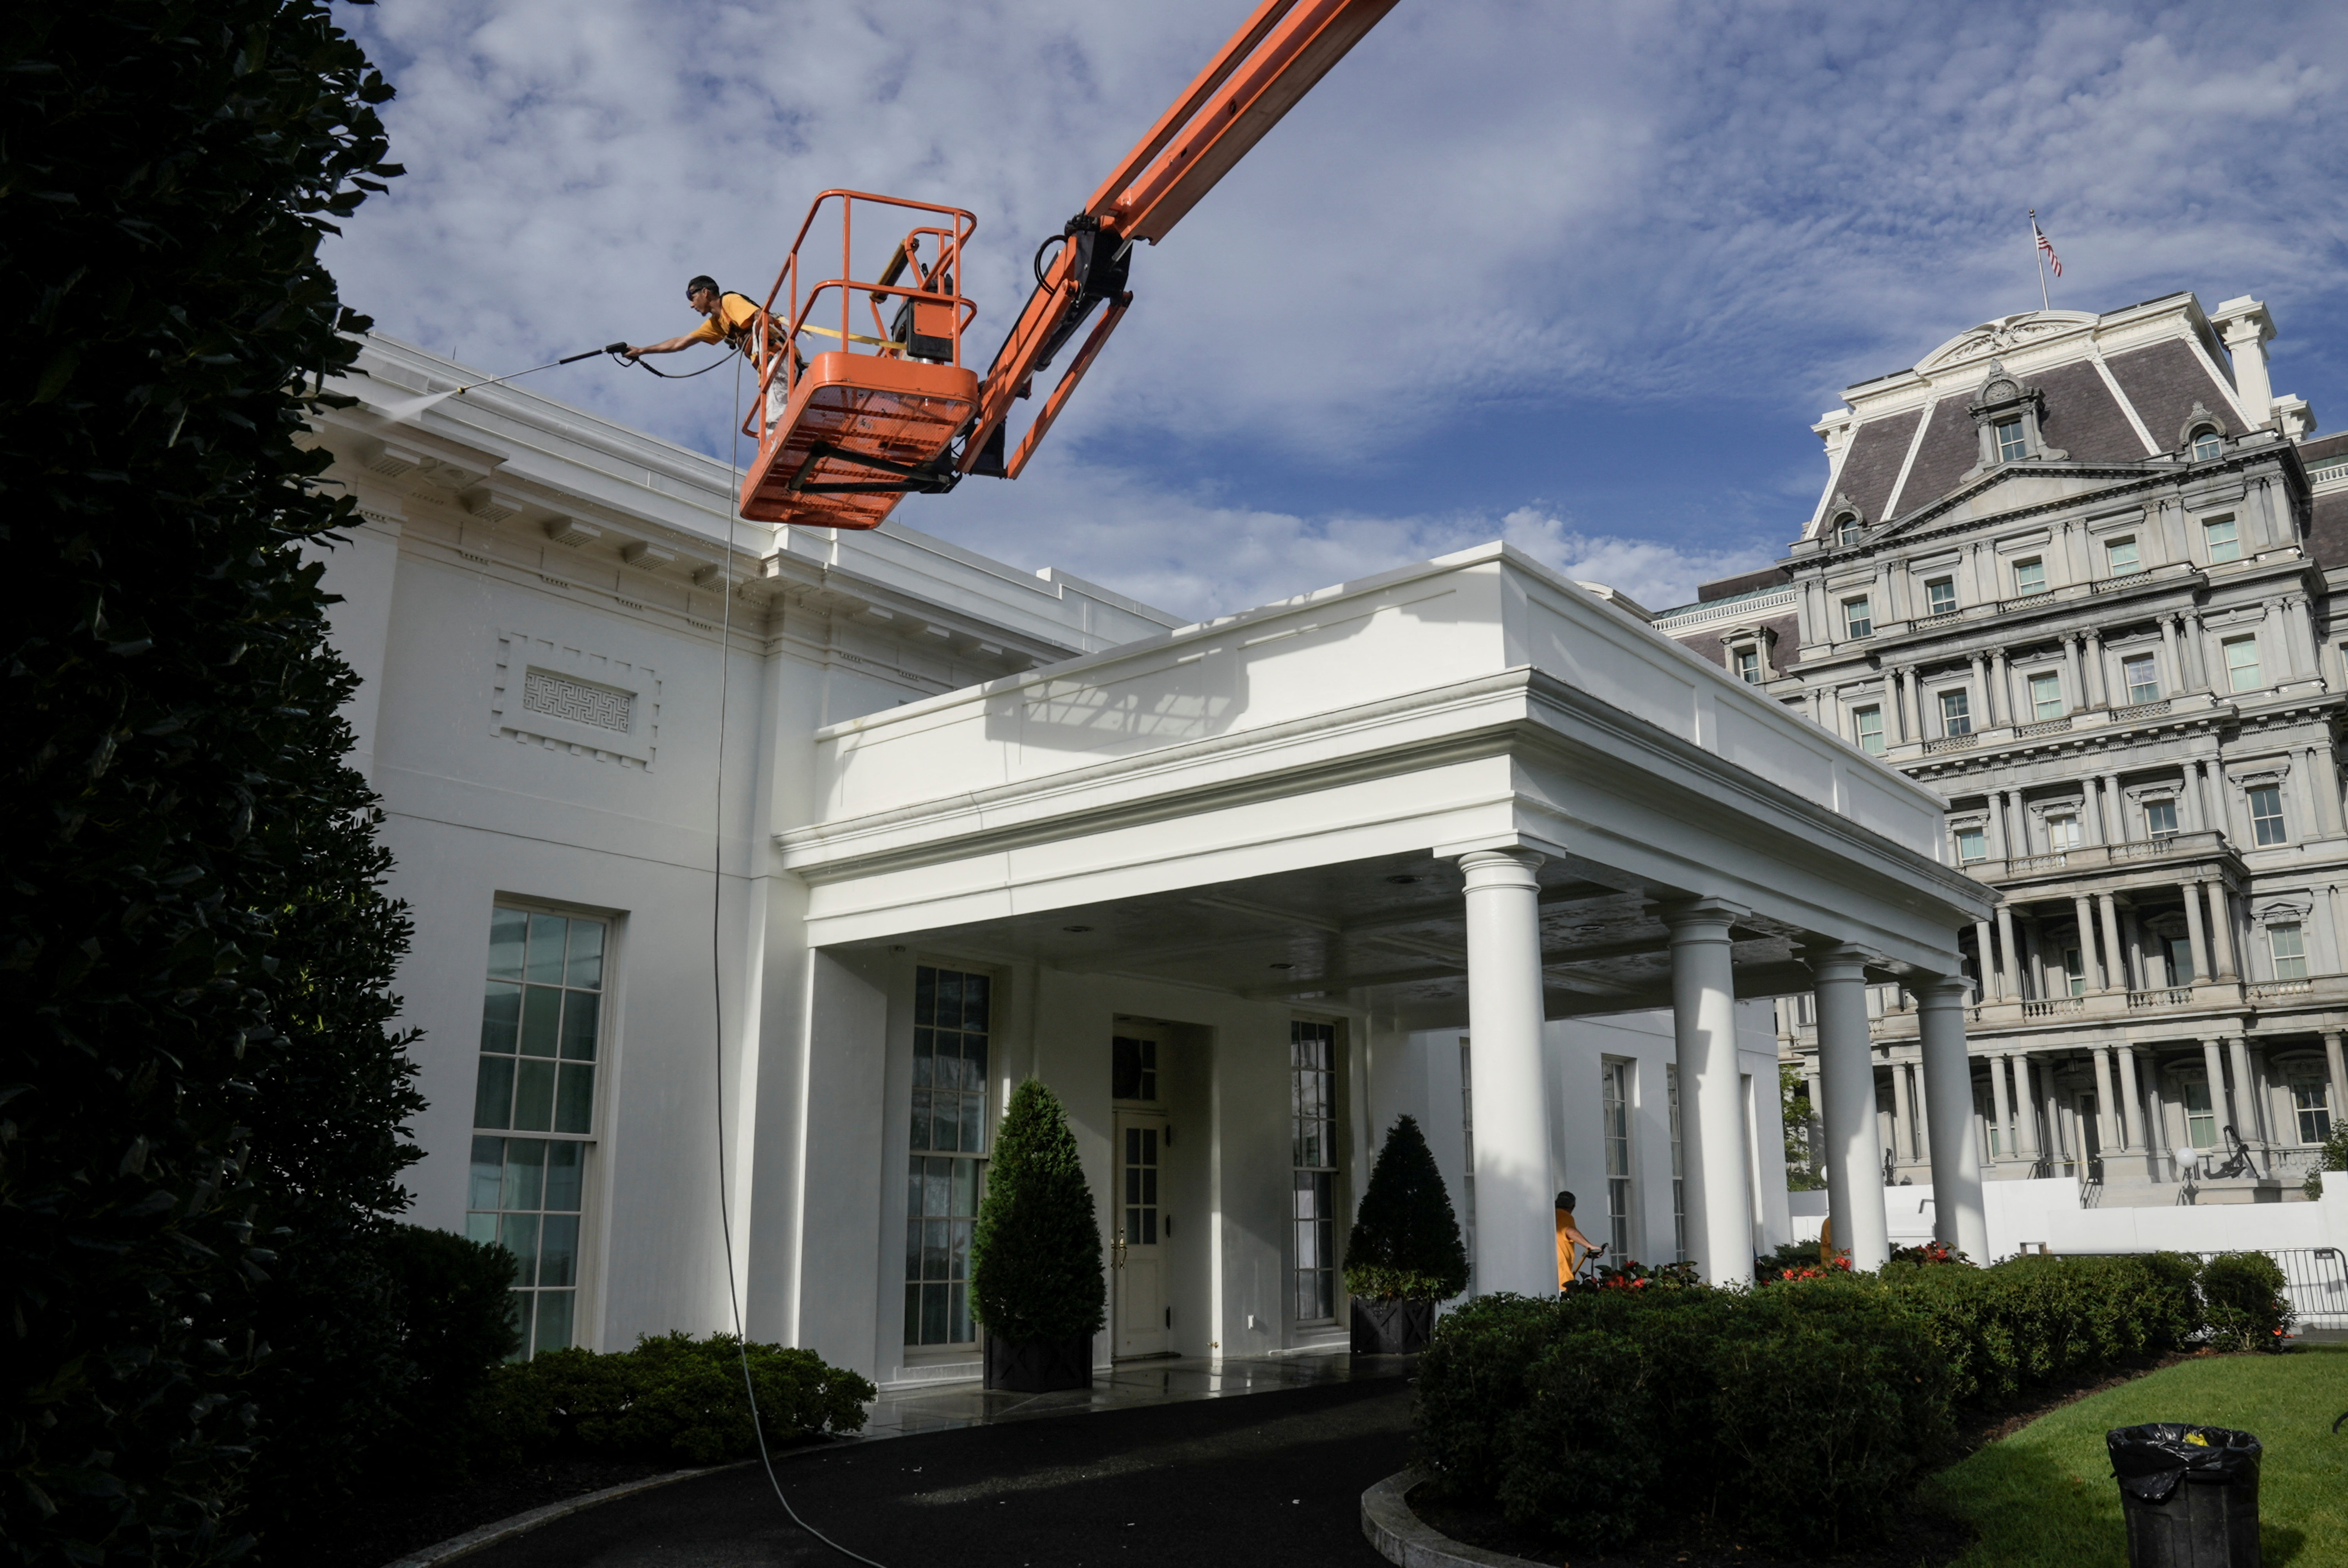 Workers clean the White House with high-pressure hoses, in Washington